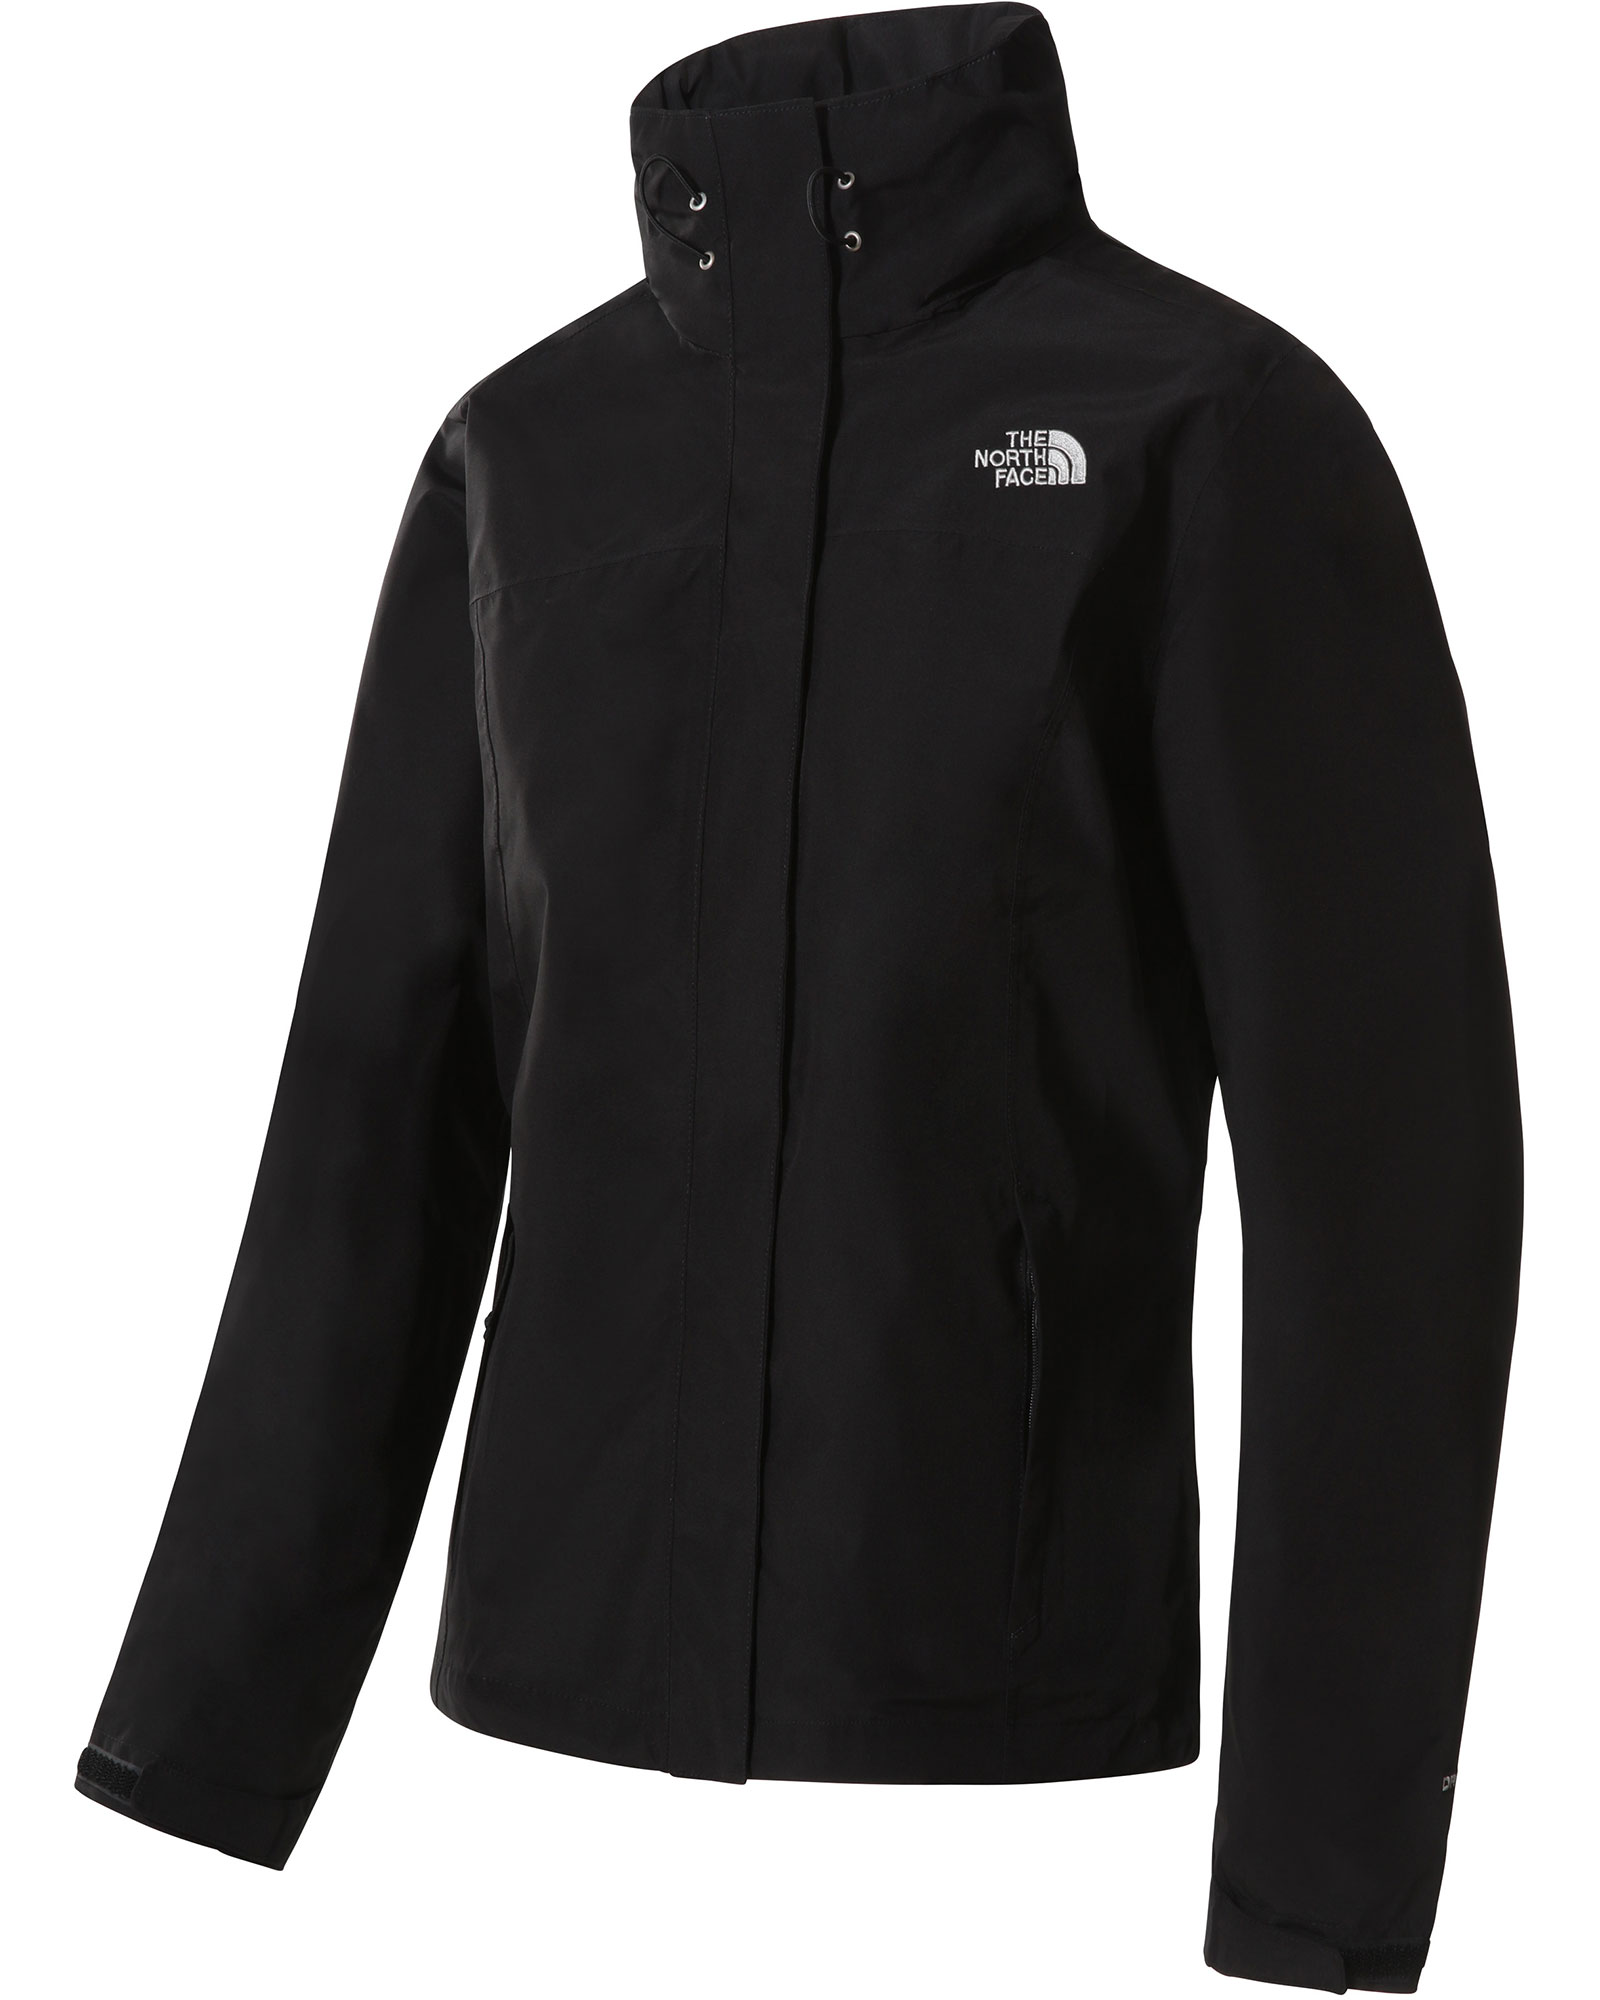 The North Face Women's Sangro DryVent Jacket